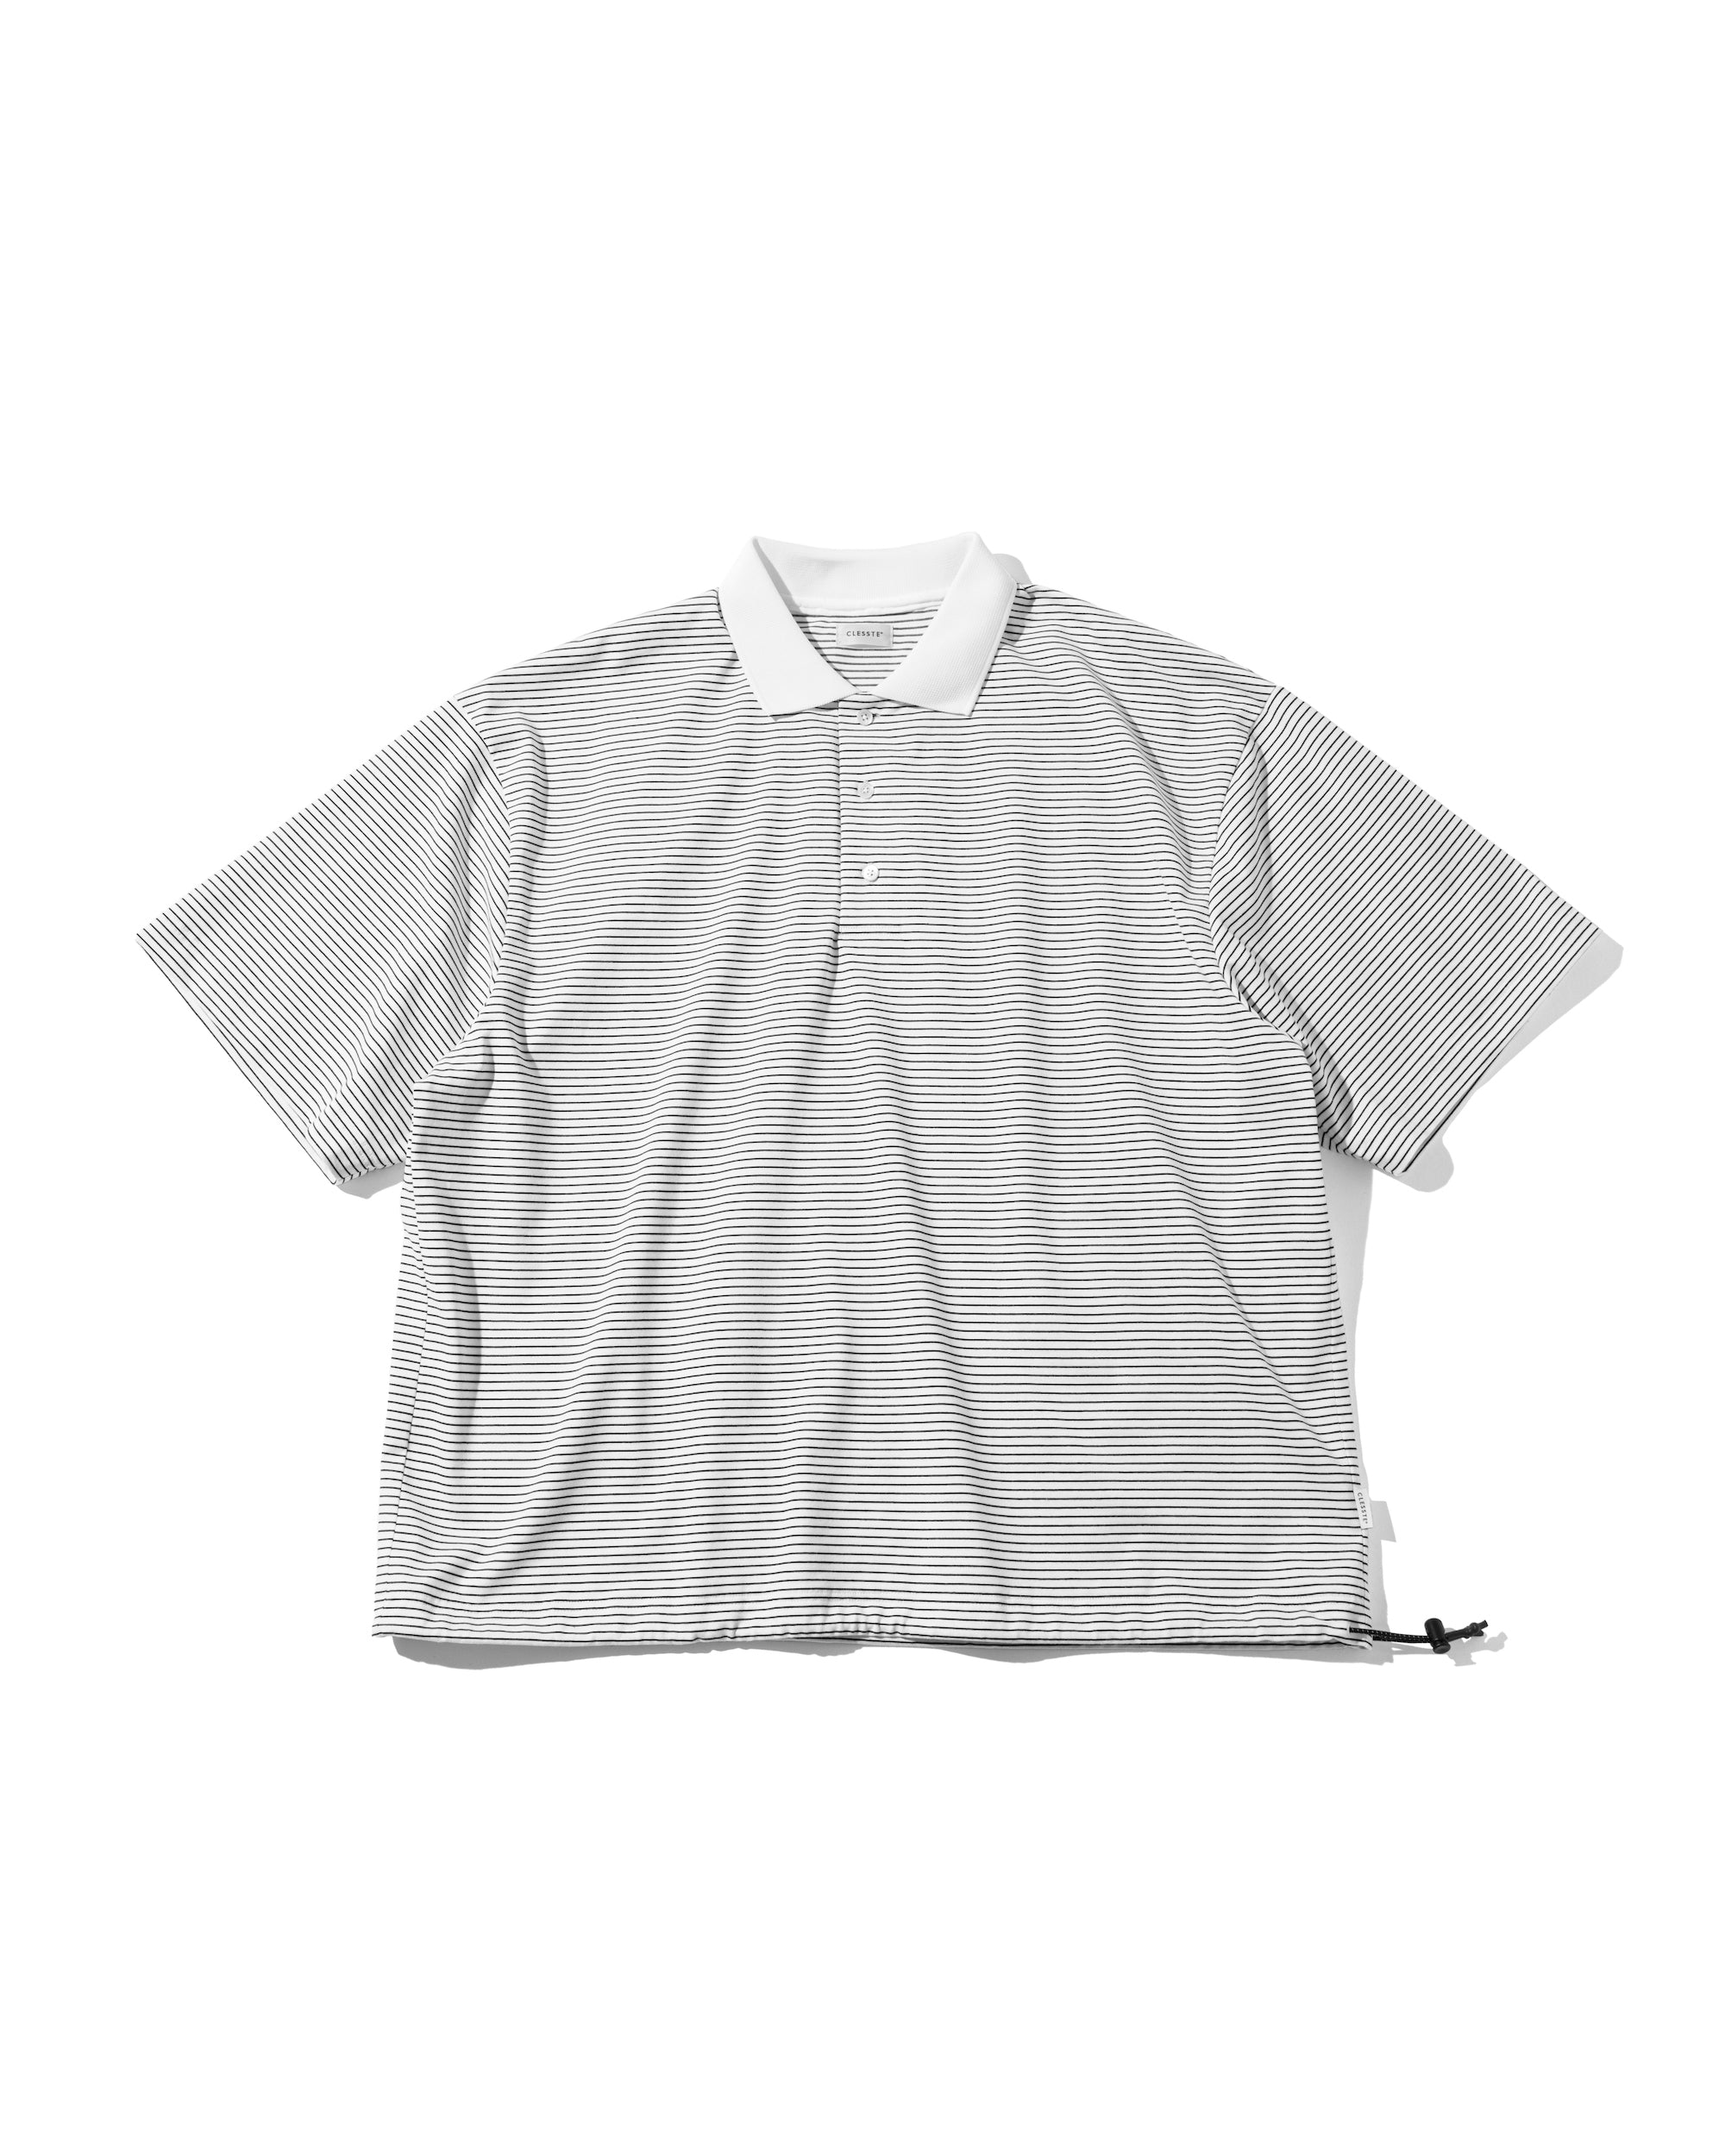 STRIPED MASSIVE S/S POLO SHIRT WITH DRAWSTRINGS